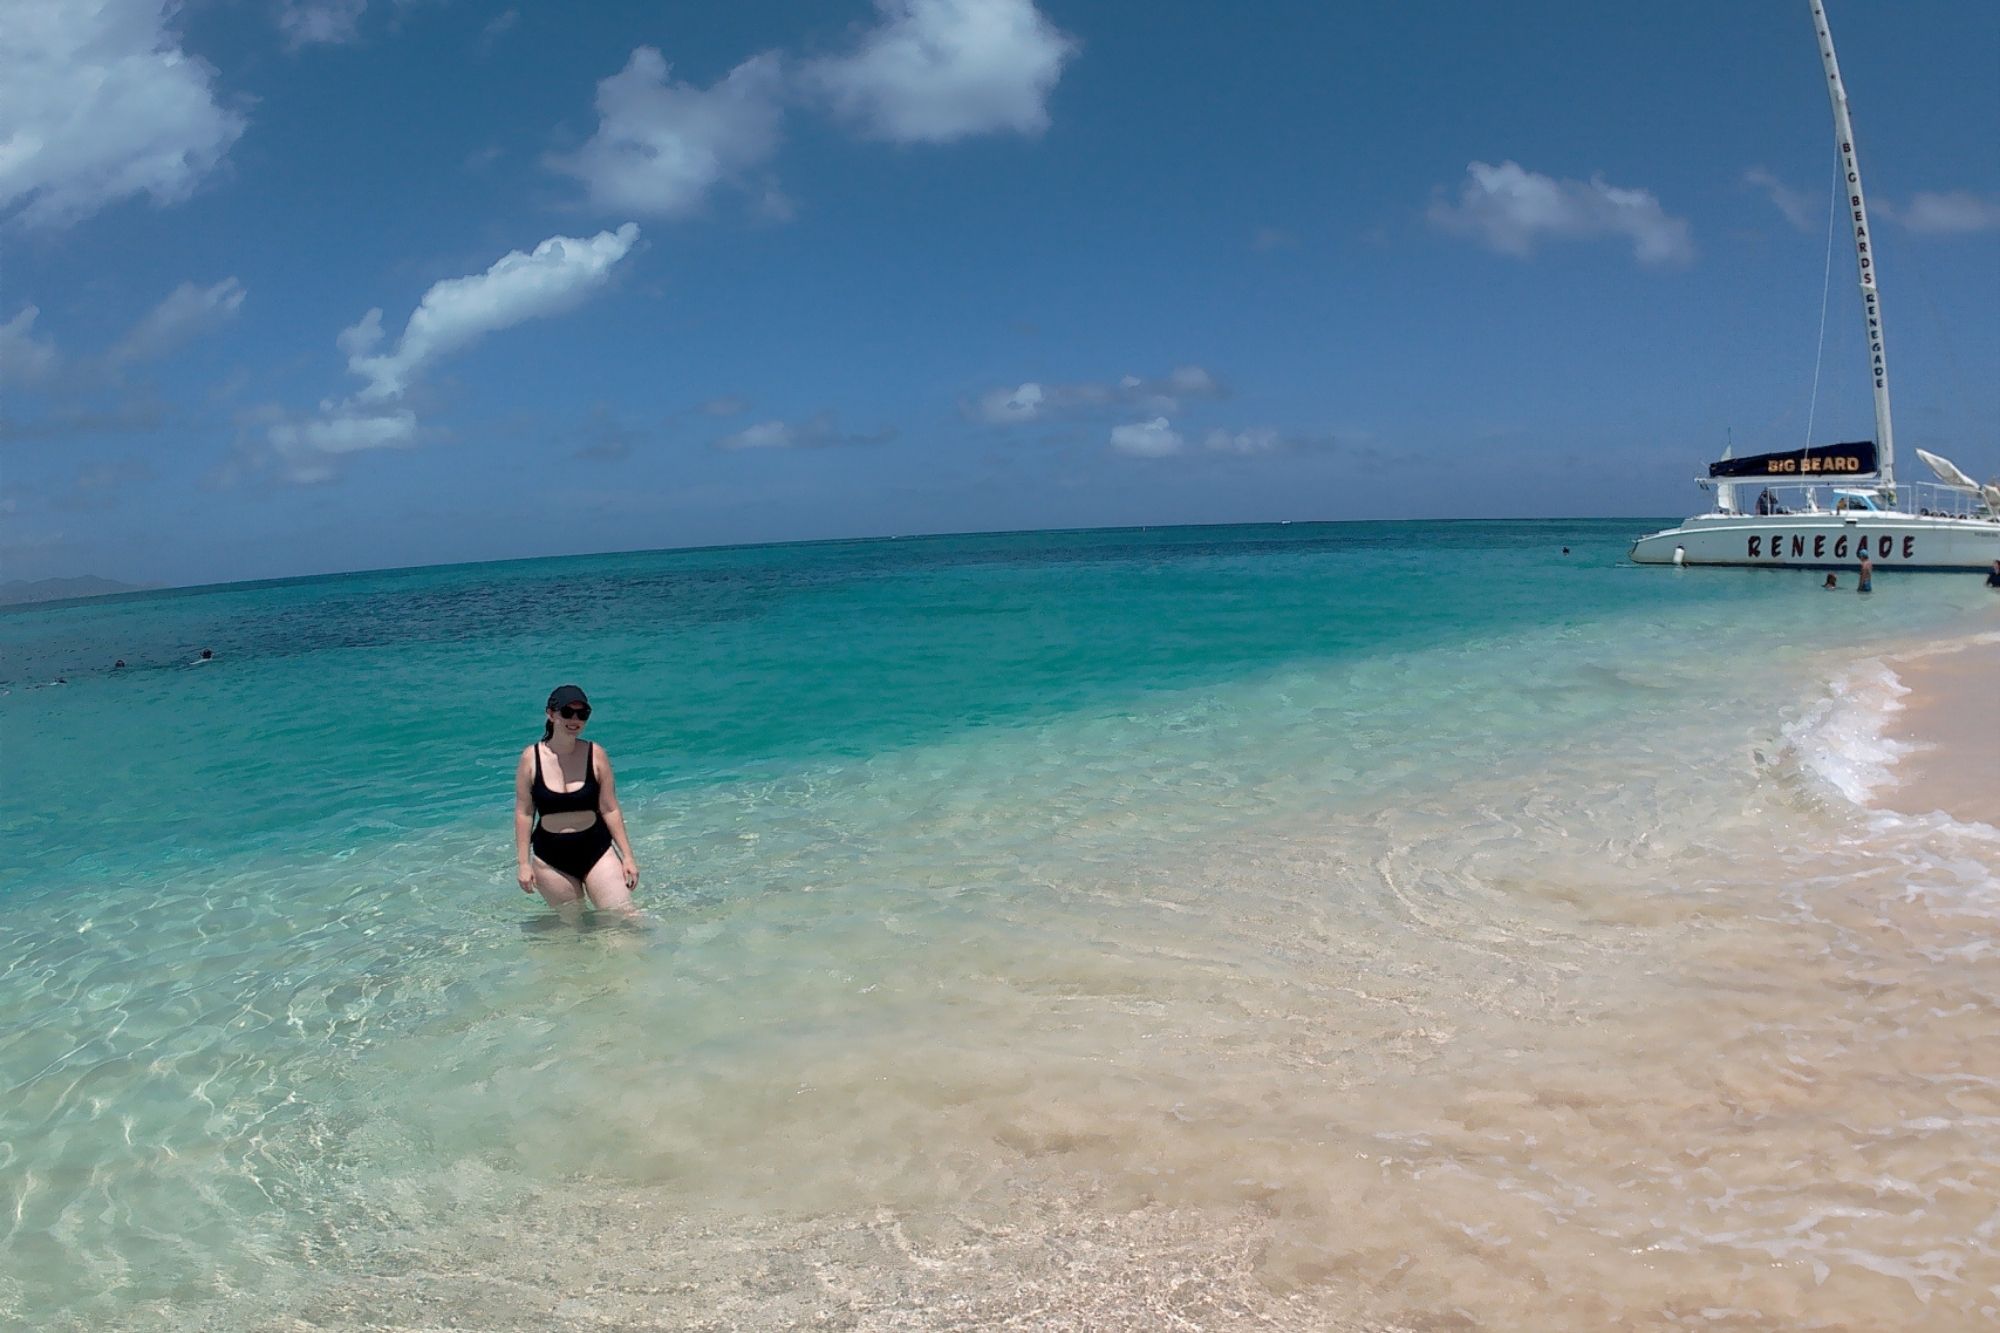 Alyssa stands in the green waters of turtle beach; to the right is a catamaran